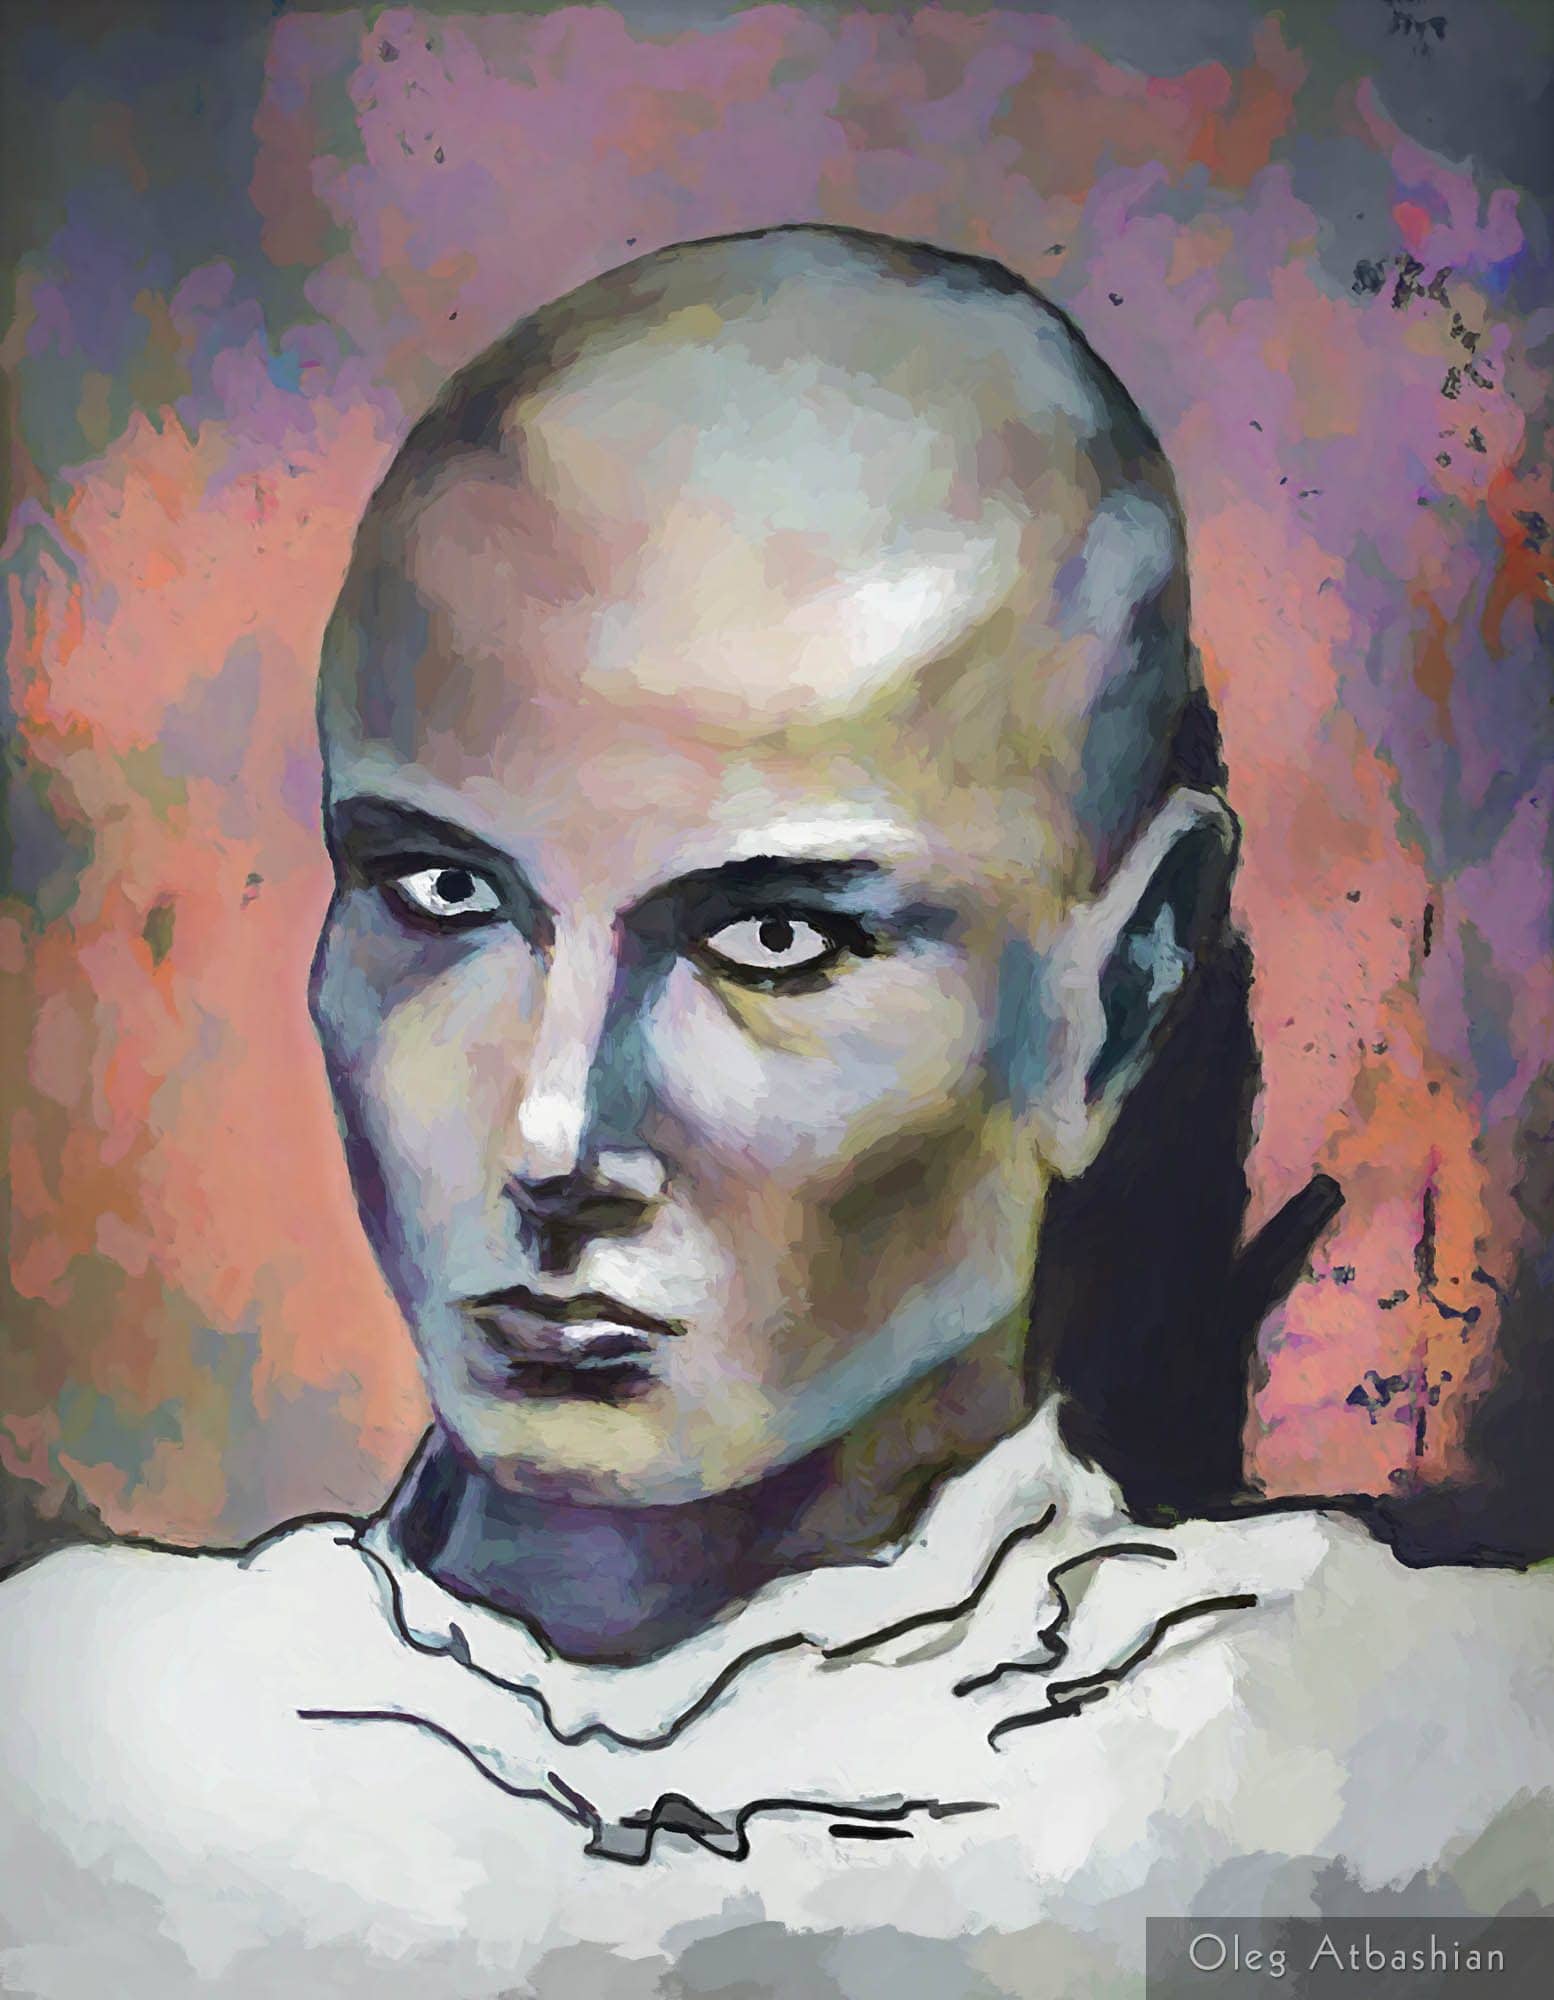 Girl with Shaved Head